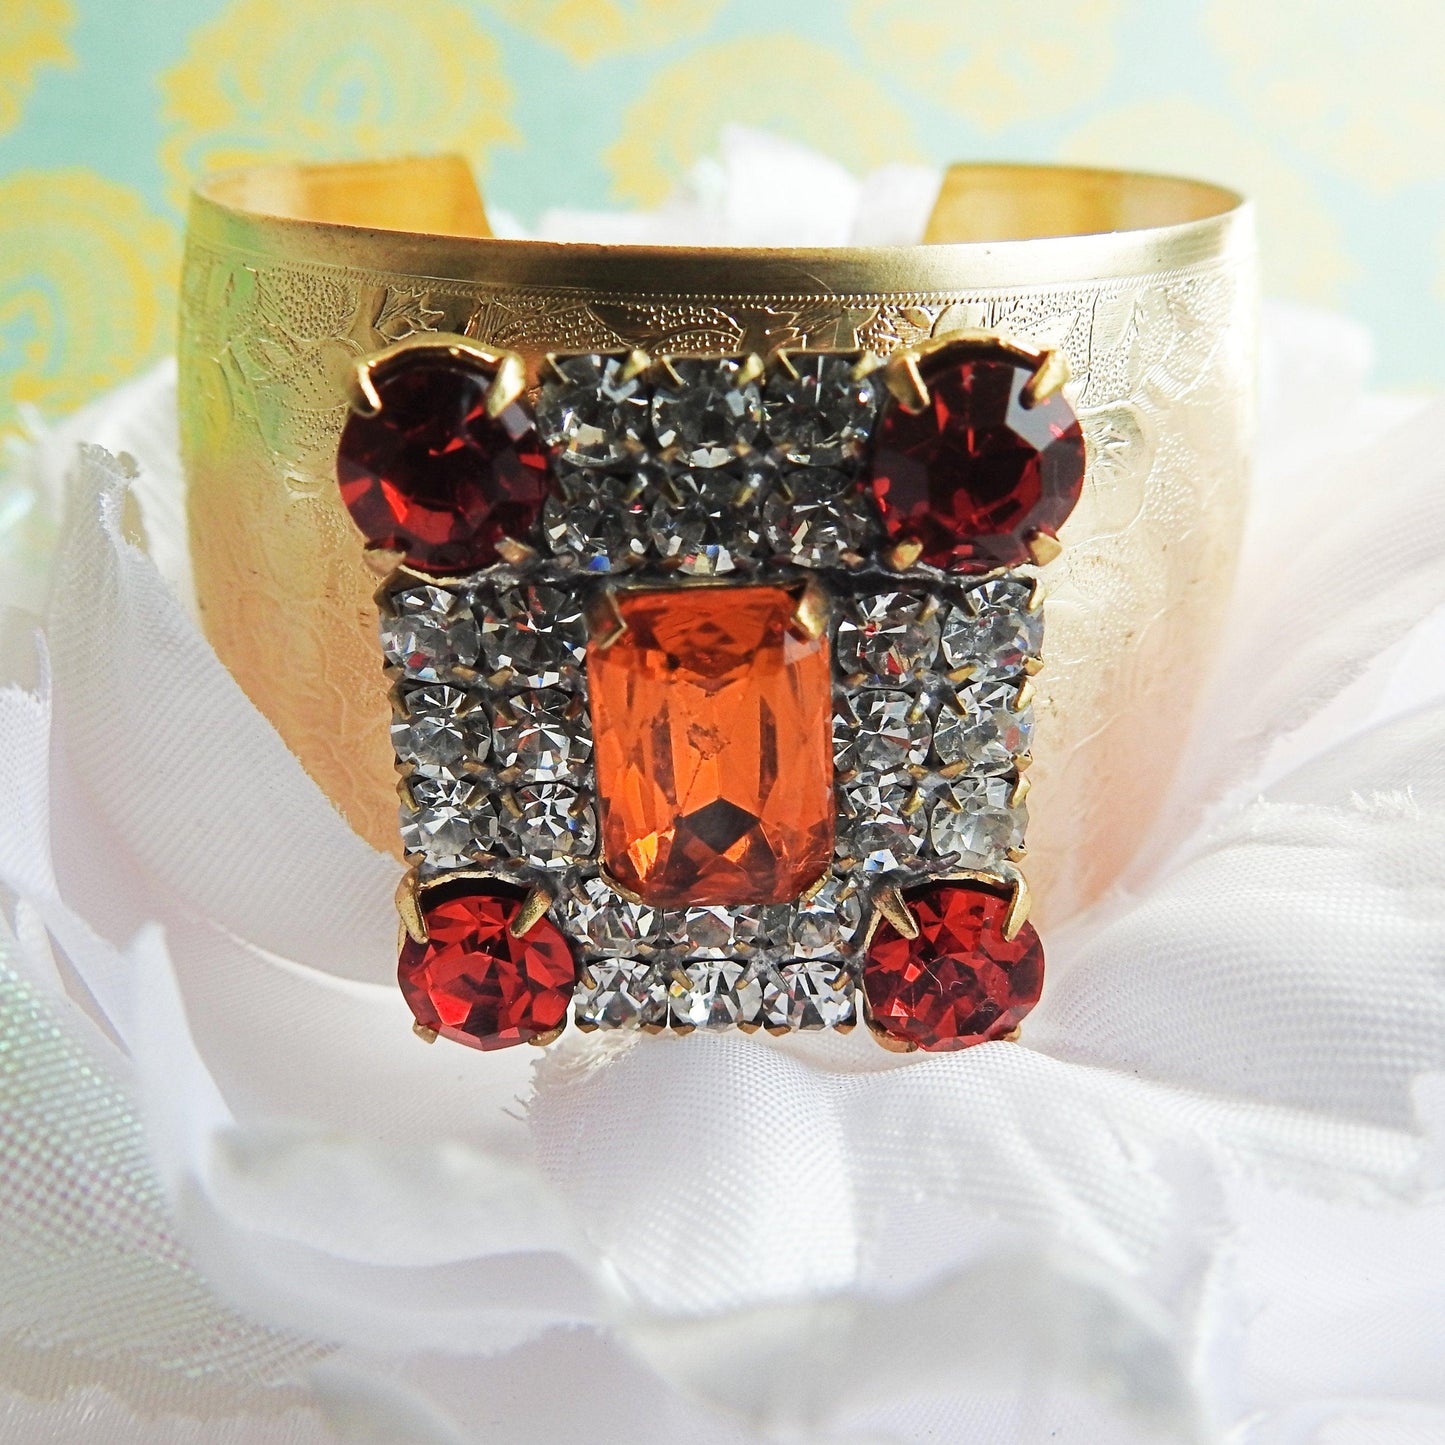 Crystal wide gold bracelet for ladies, made from a large sparkly orange geometric sparkly Czech glass button, anthro inspired bangle jewelry